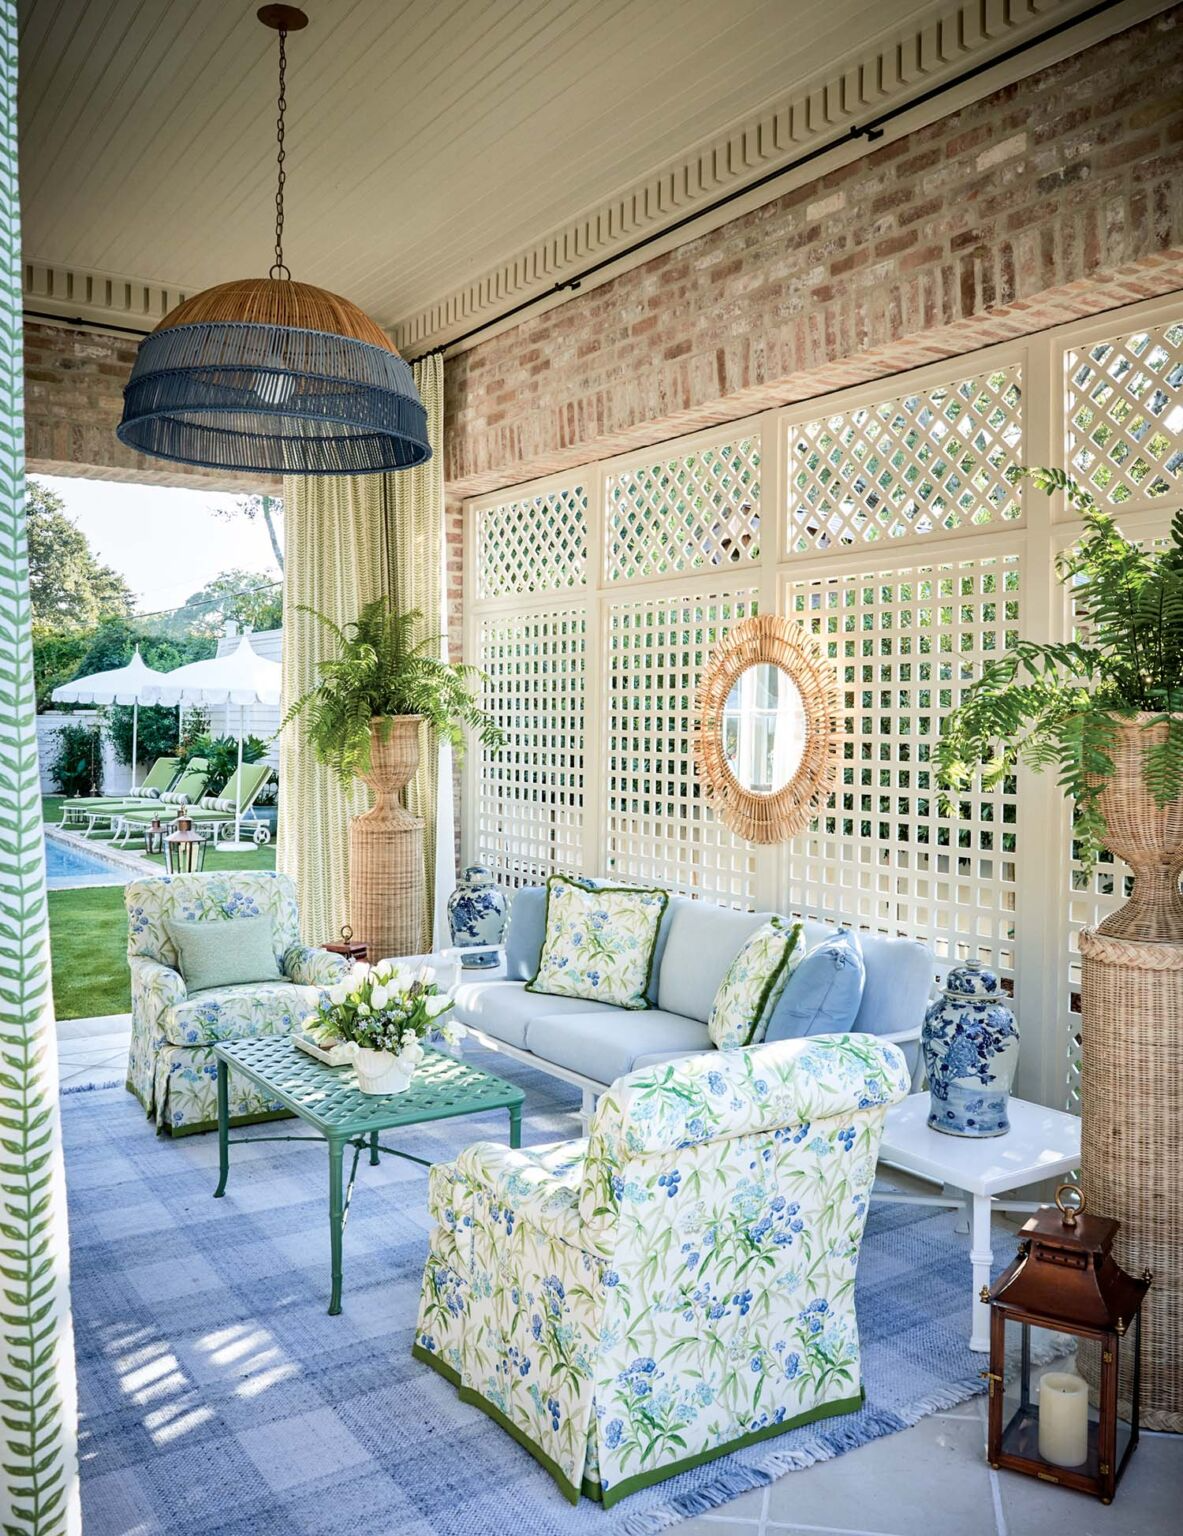 Creative Design Ideas for Screening in Your Back Porch